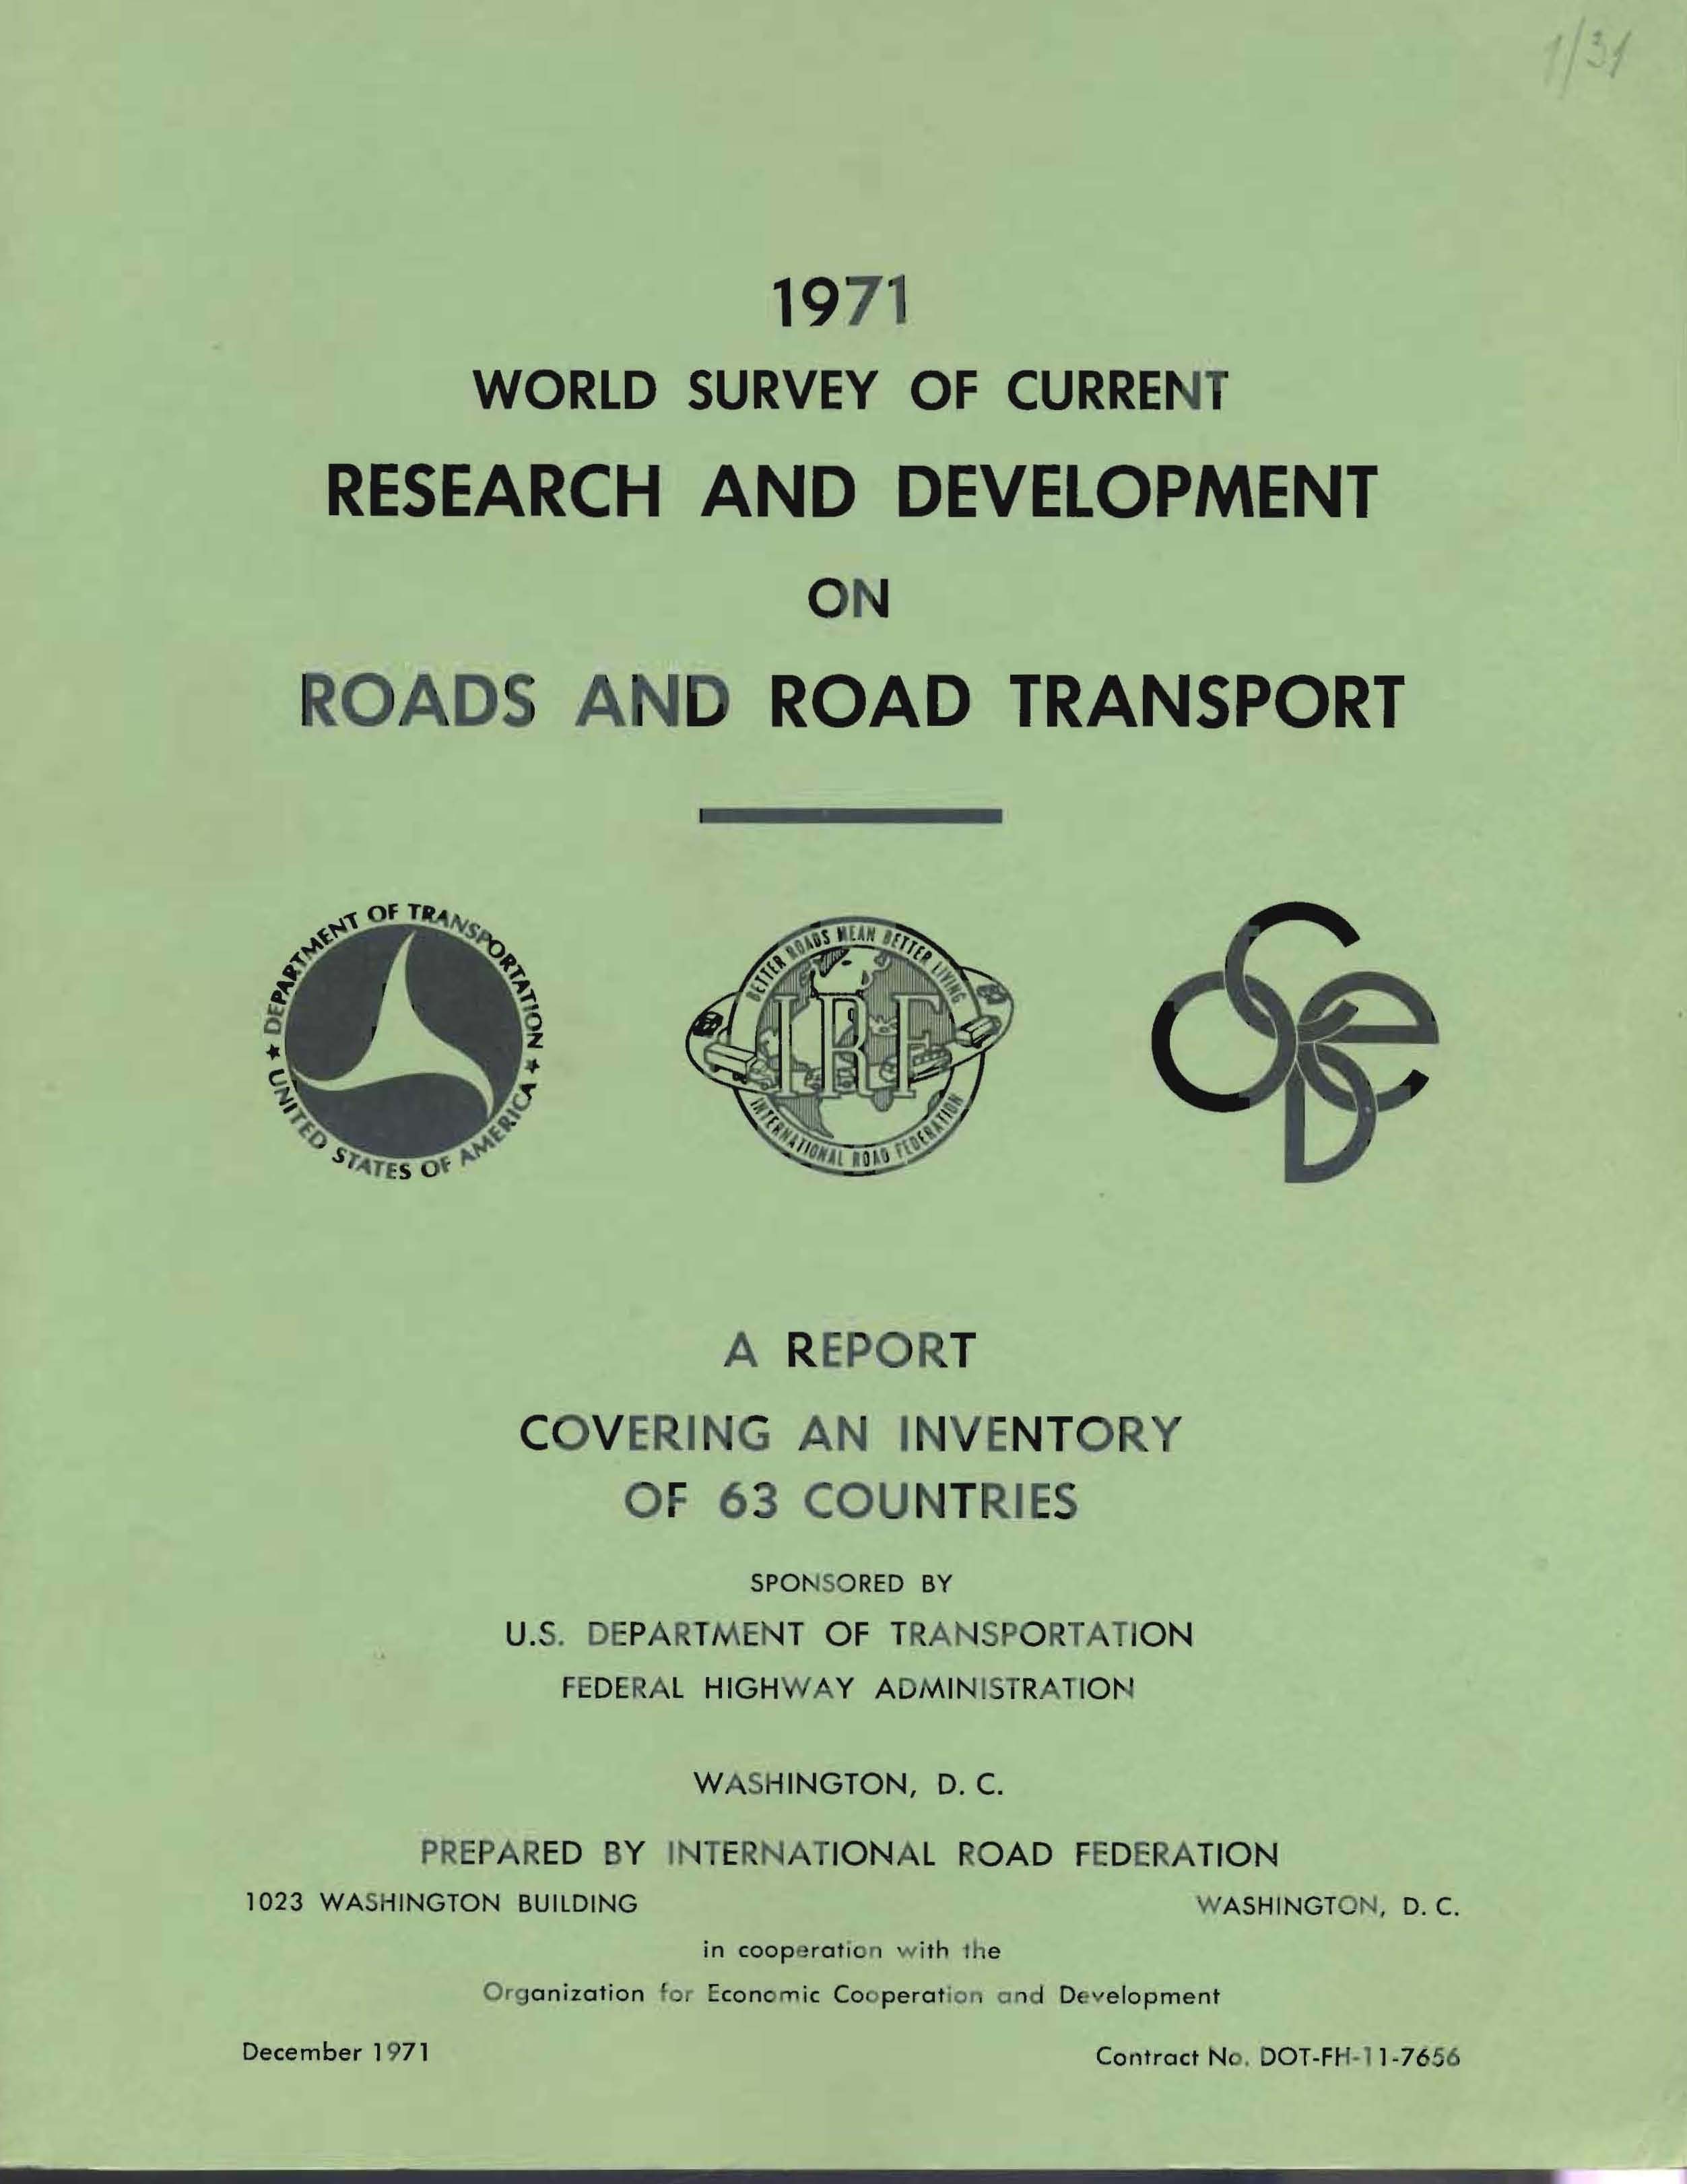 Research and Development on Roads and Road Transport